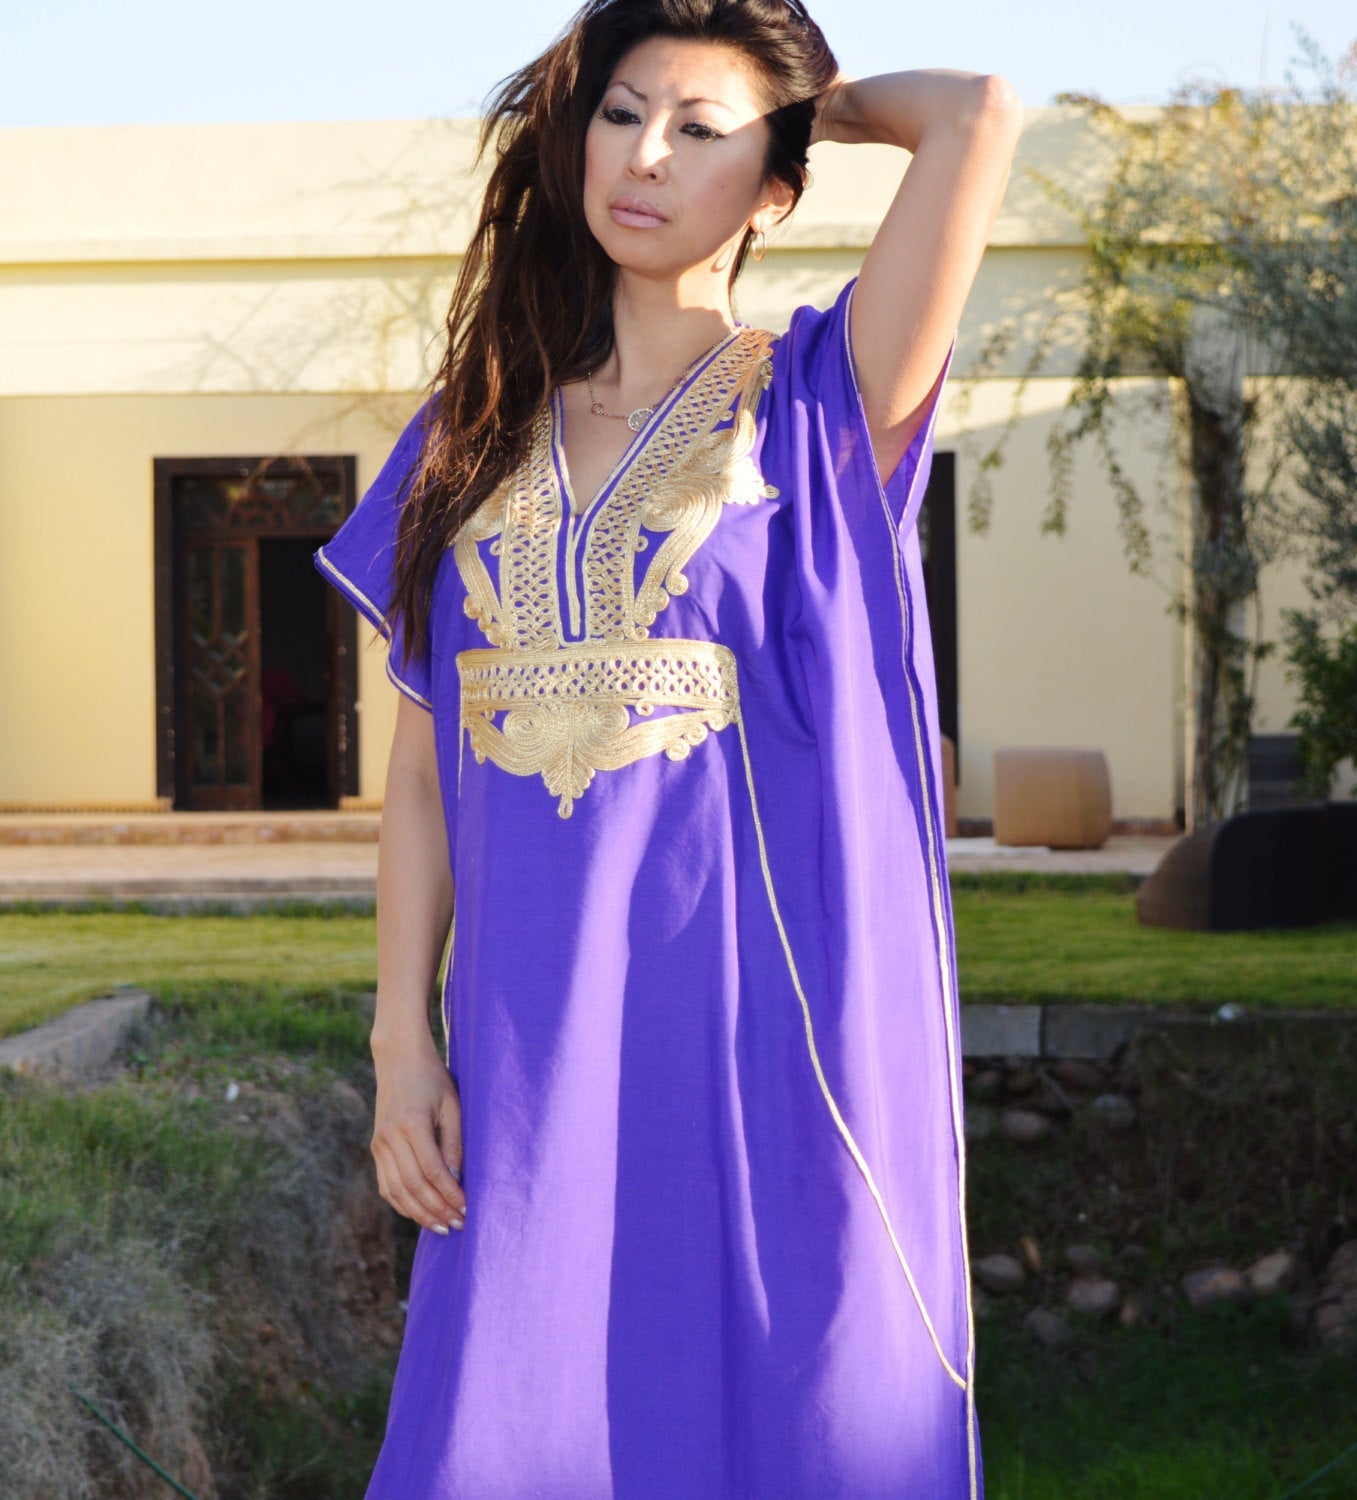 MOROCCAN HANDMADE KAFTAN TERZA 1 BLUE EMBROIDERED IN GOLD